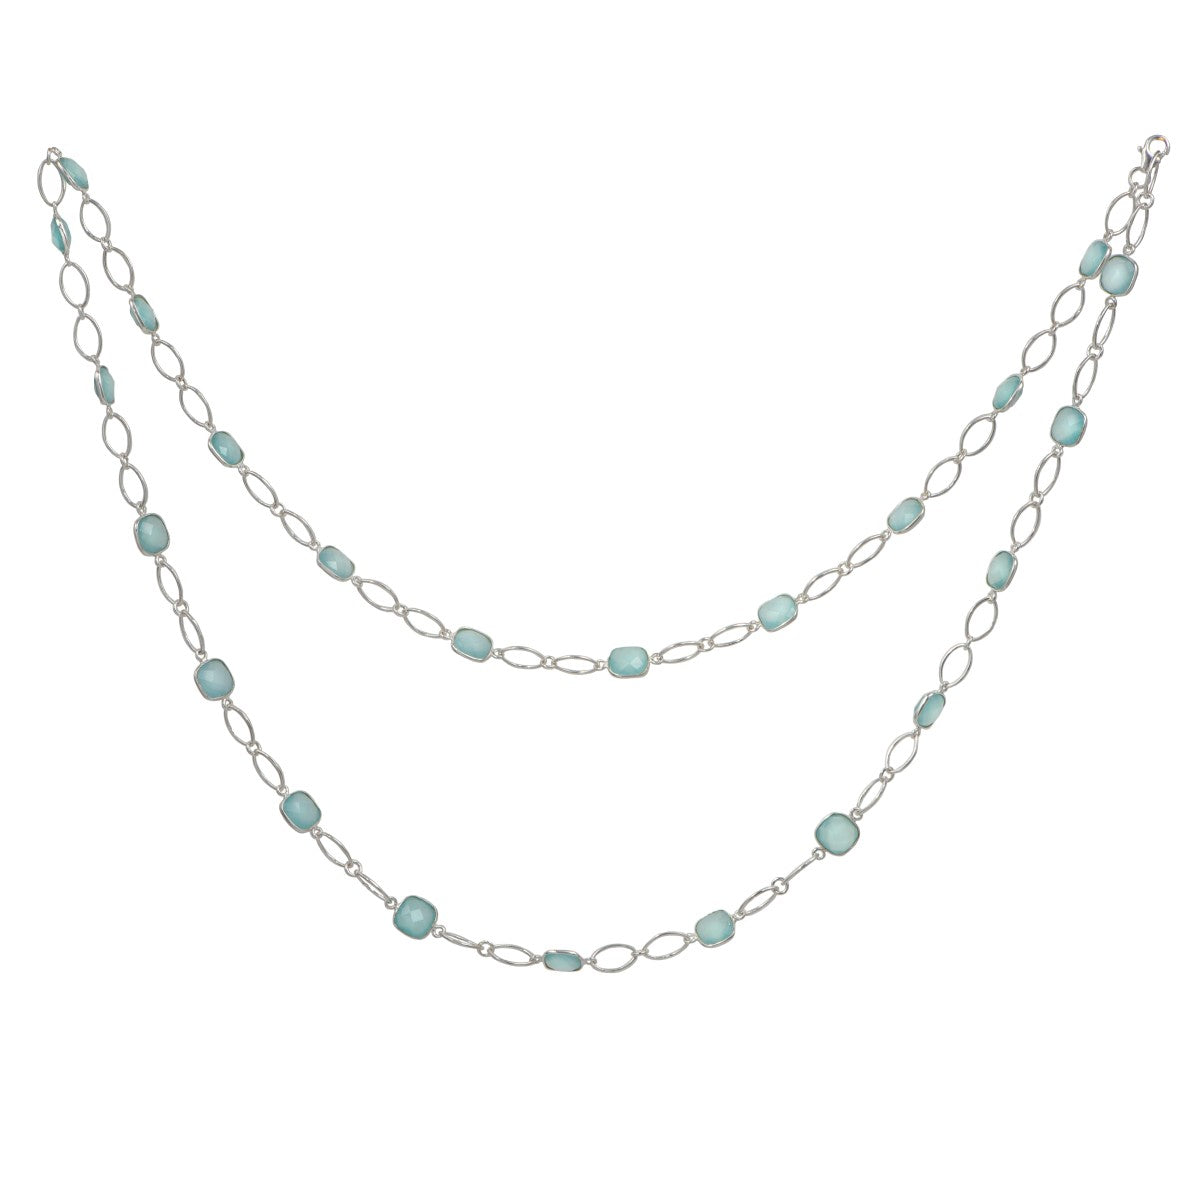 Aqua Chalcedony Sterling Silver Long Statement Necklace with Large Oval Links Chain